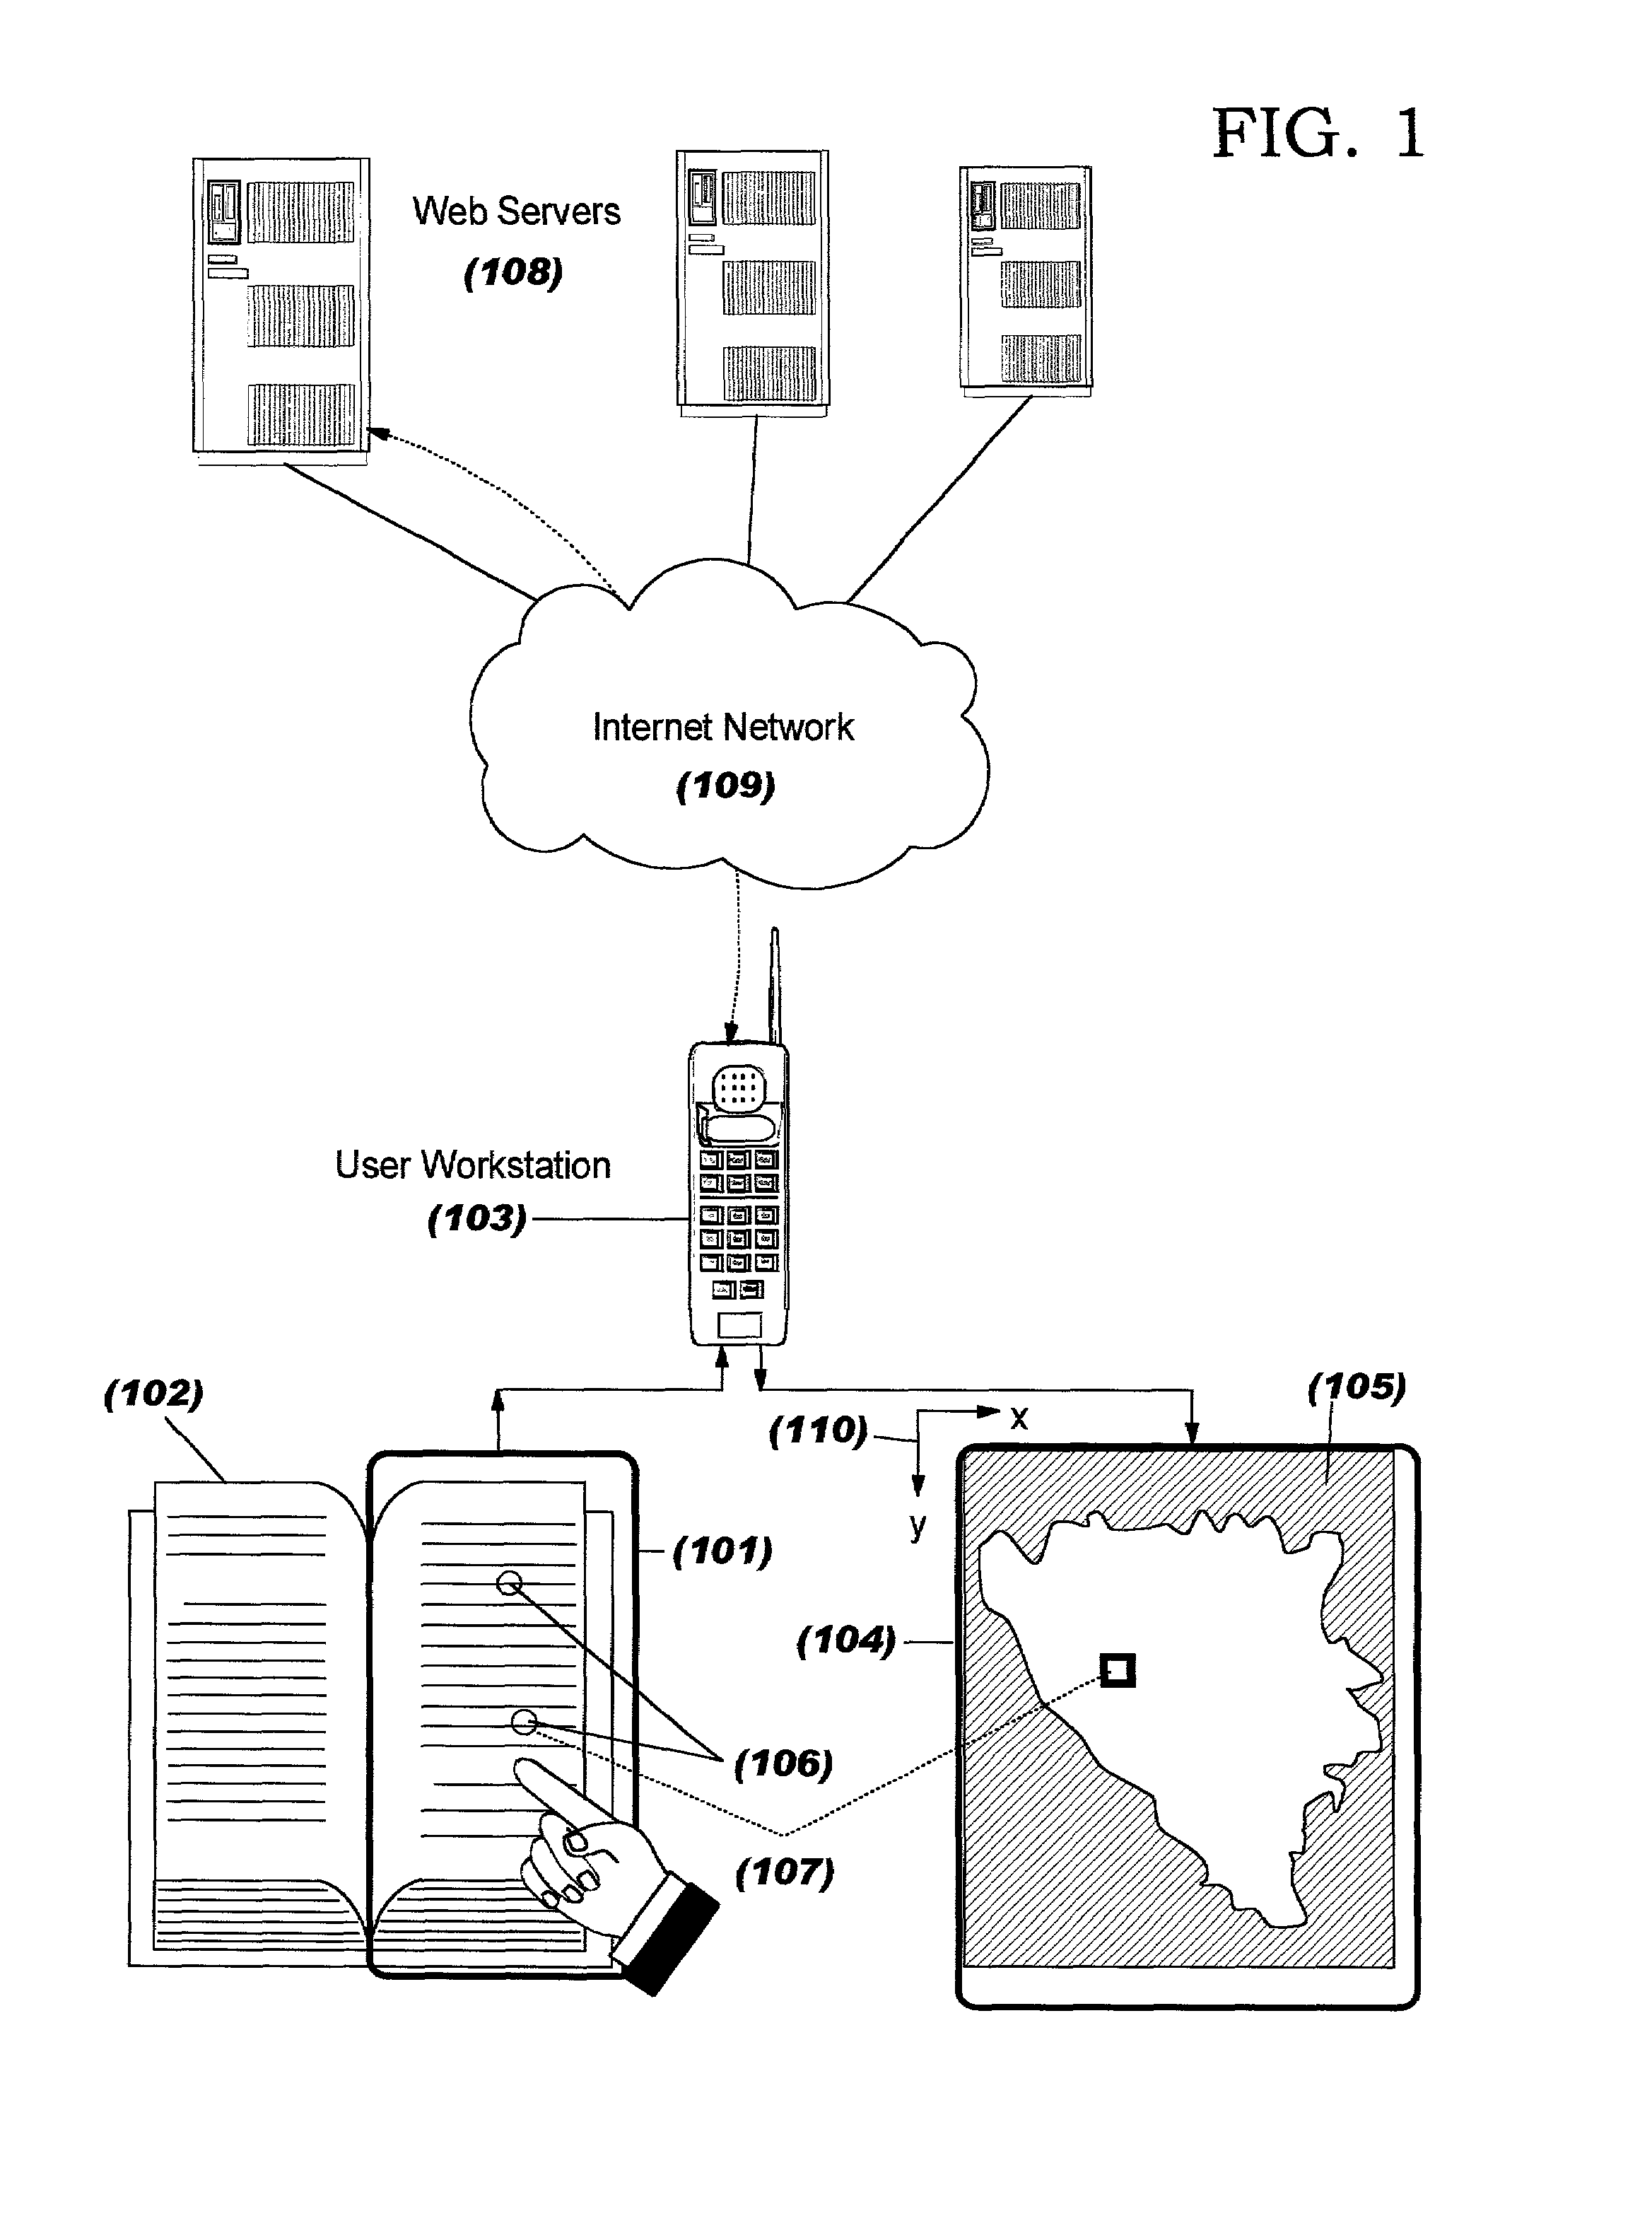 System and method for locating on a physical document items referenced in another physical document